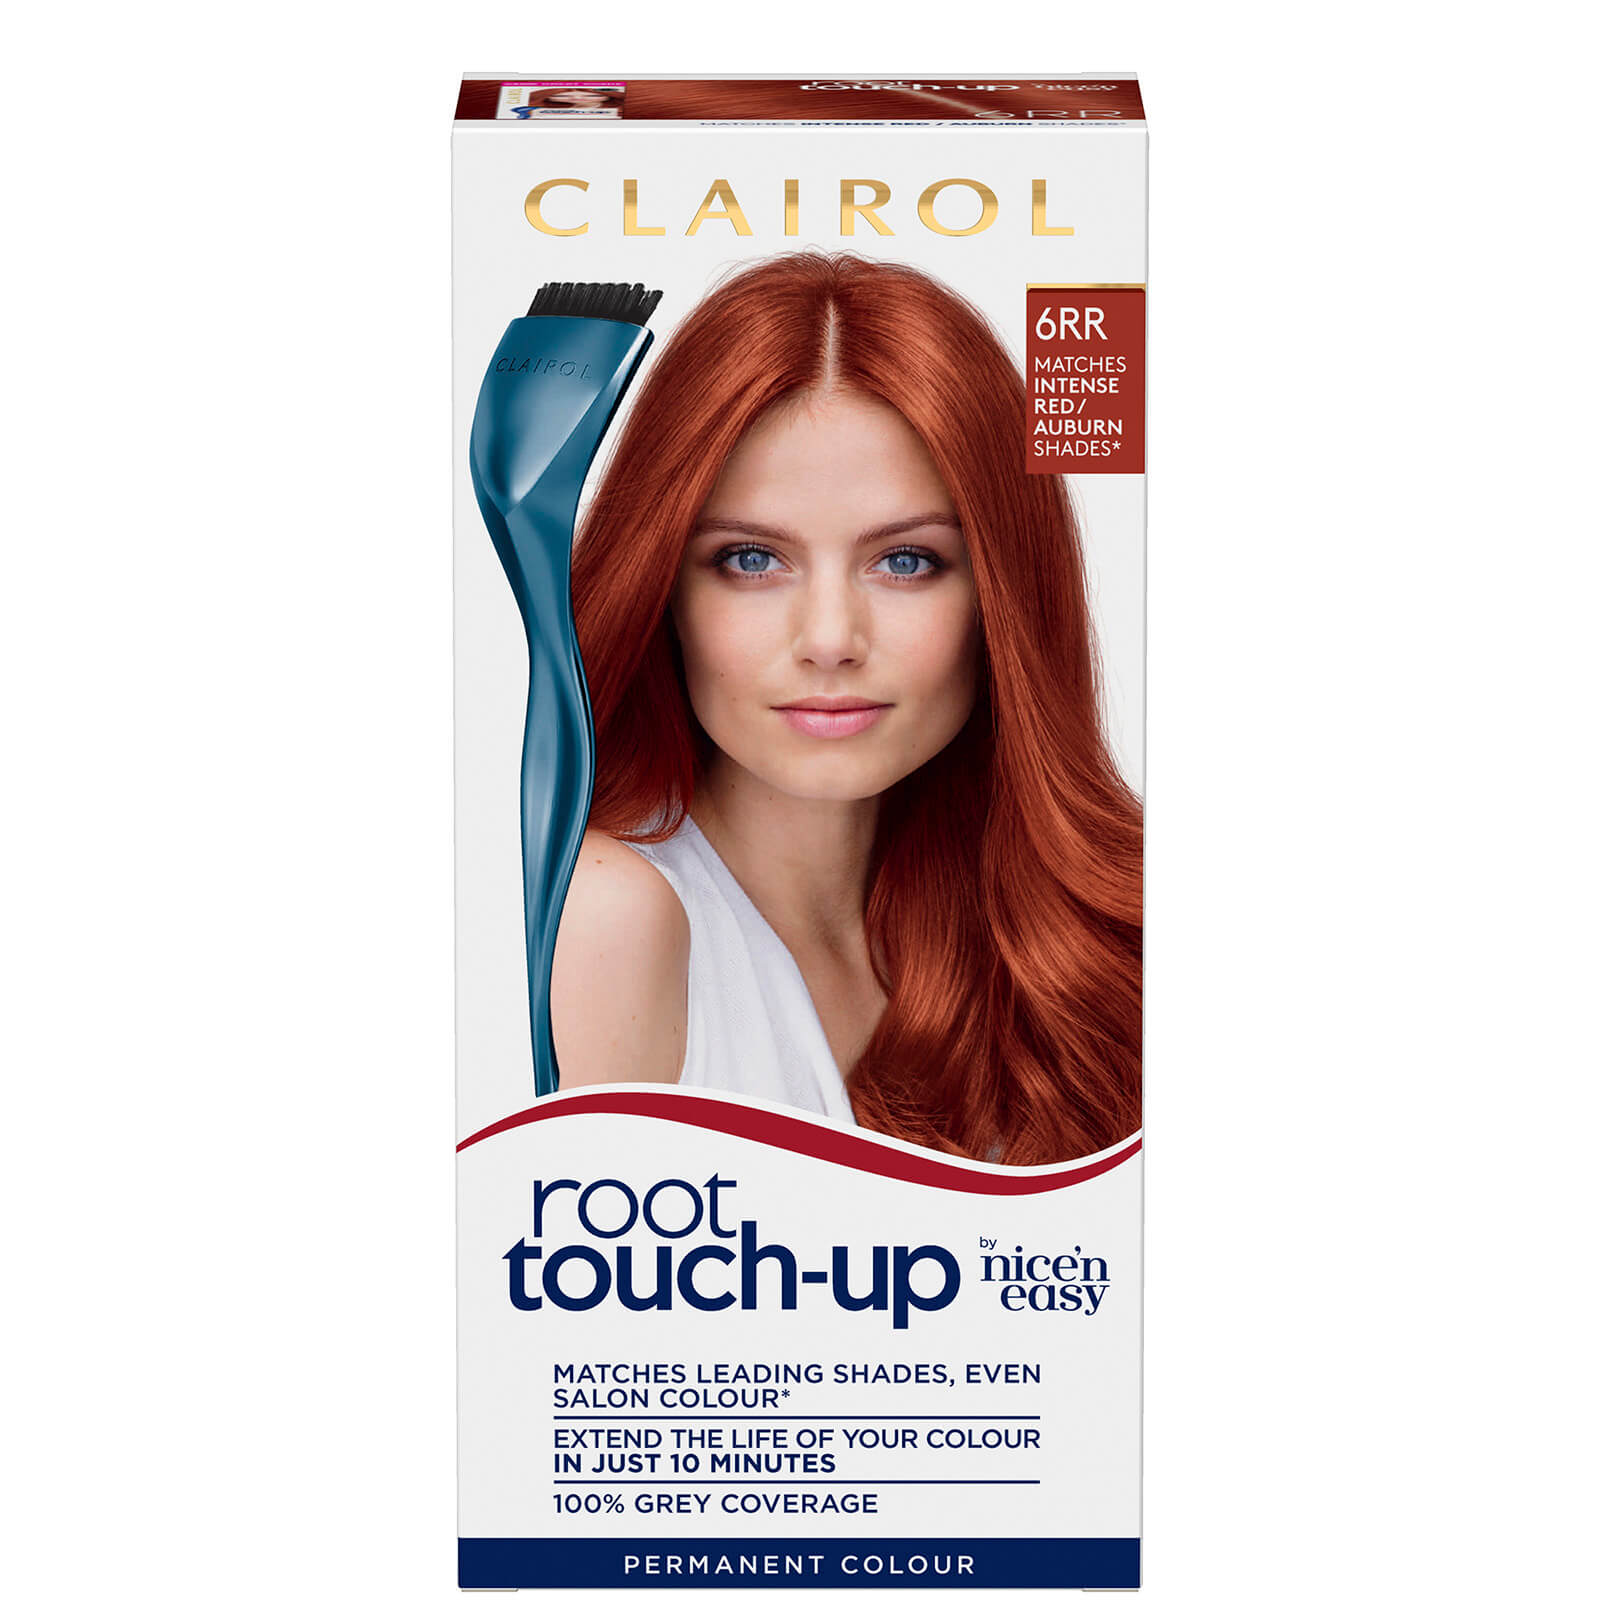 Clairol Root Touch-Up Permanent Hair Dye Long-lasting Intensifying Colour with Full Coverage 30ml (Various Shades) - 6RR Intense Red